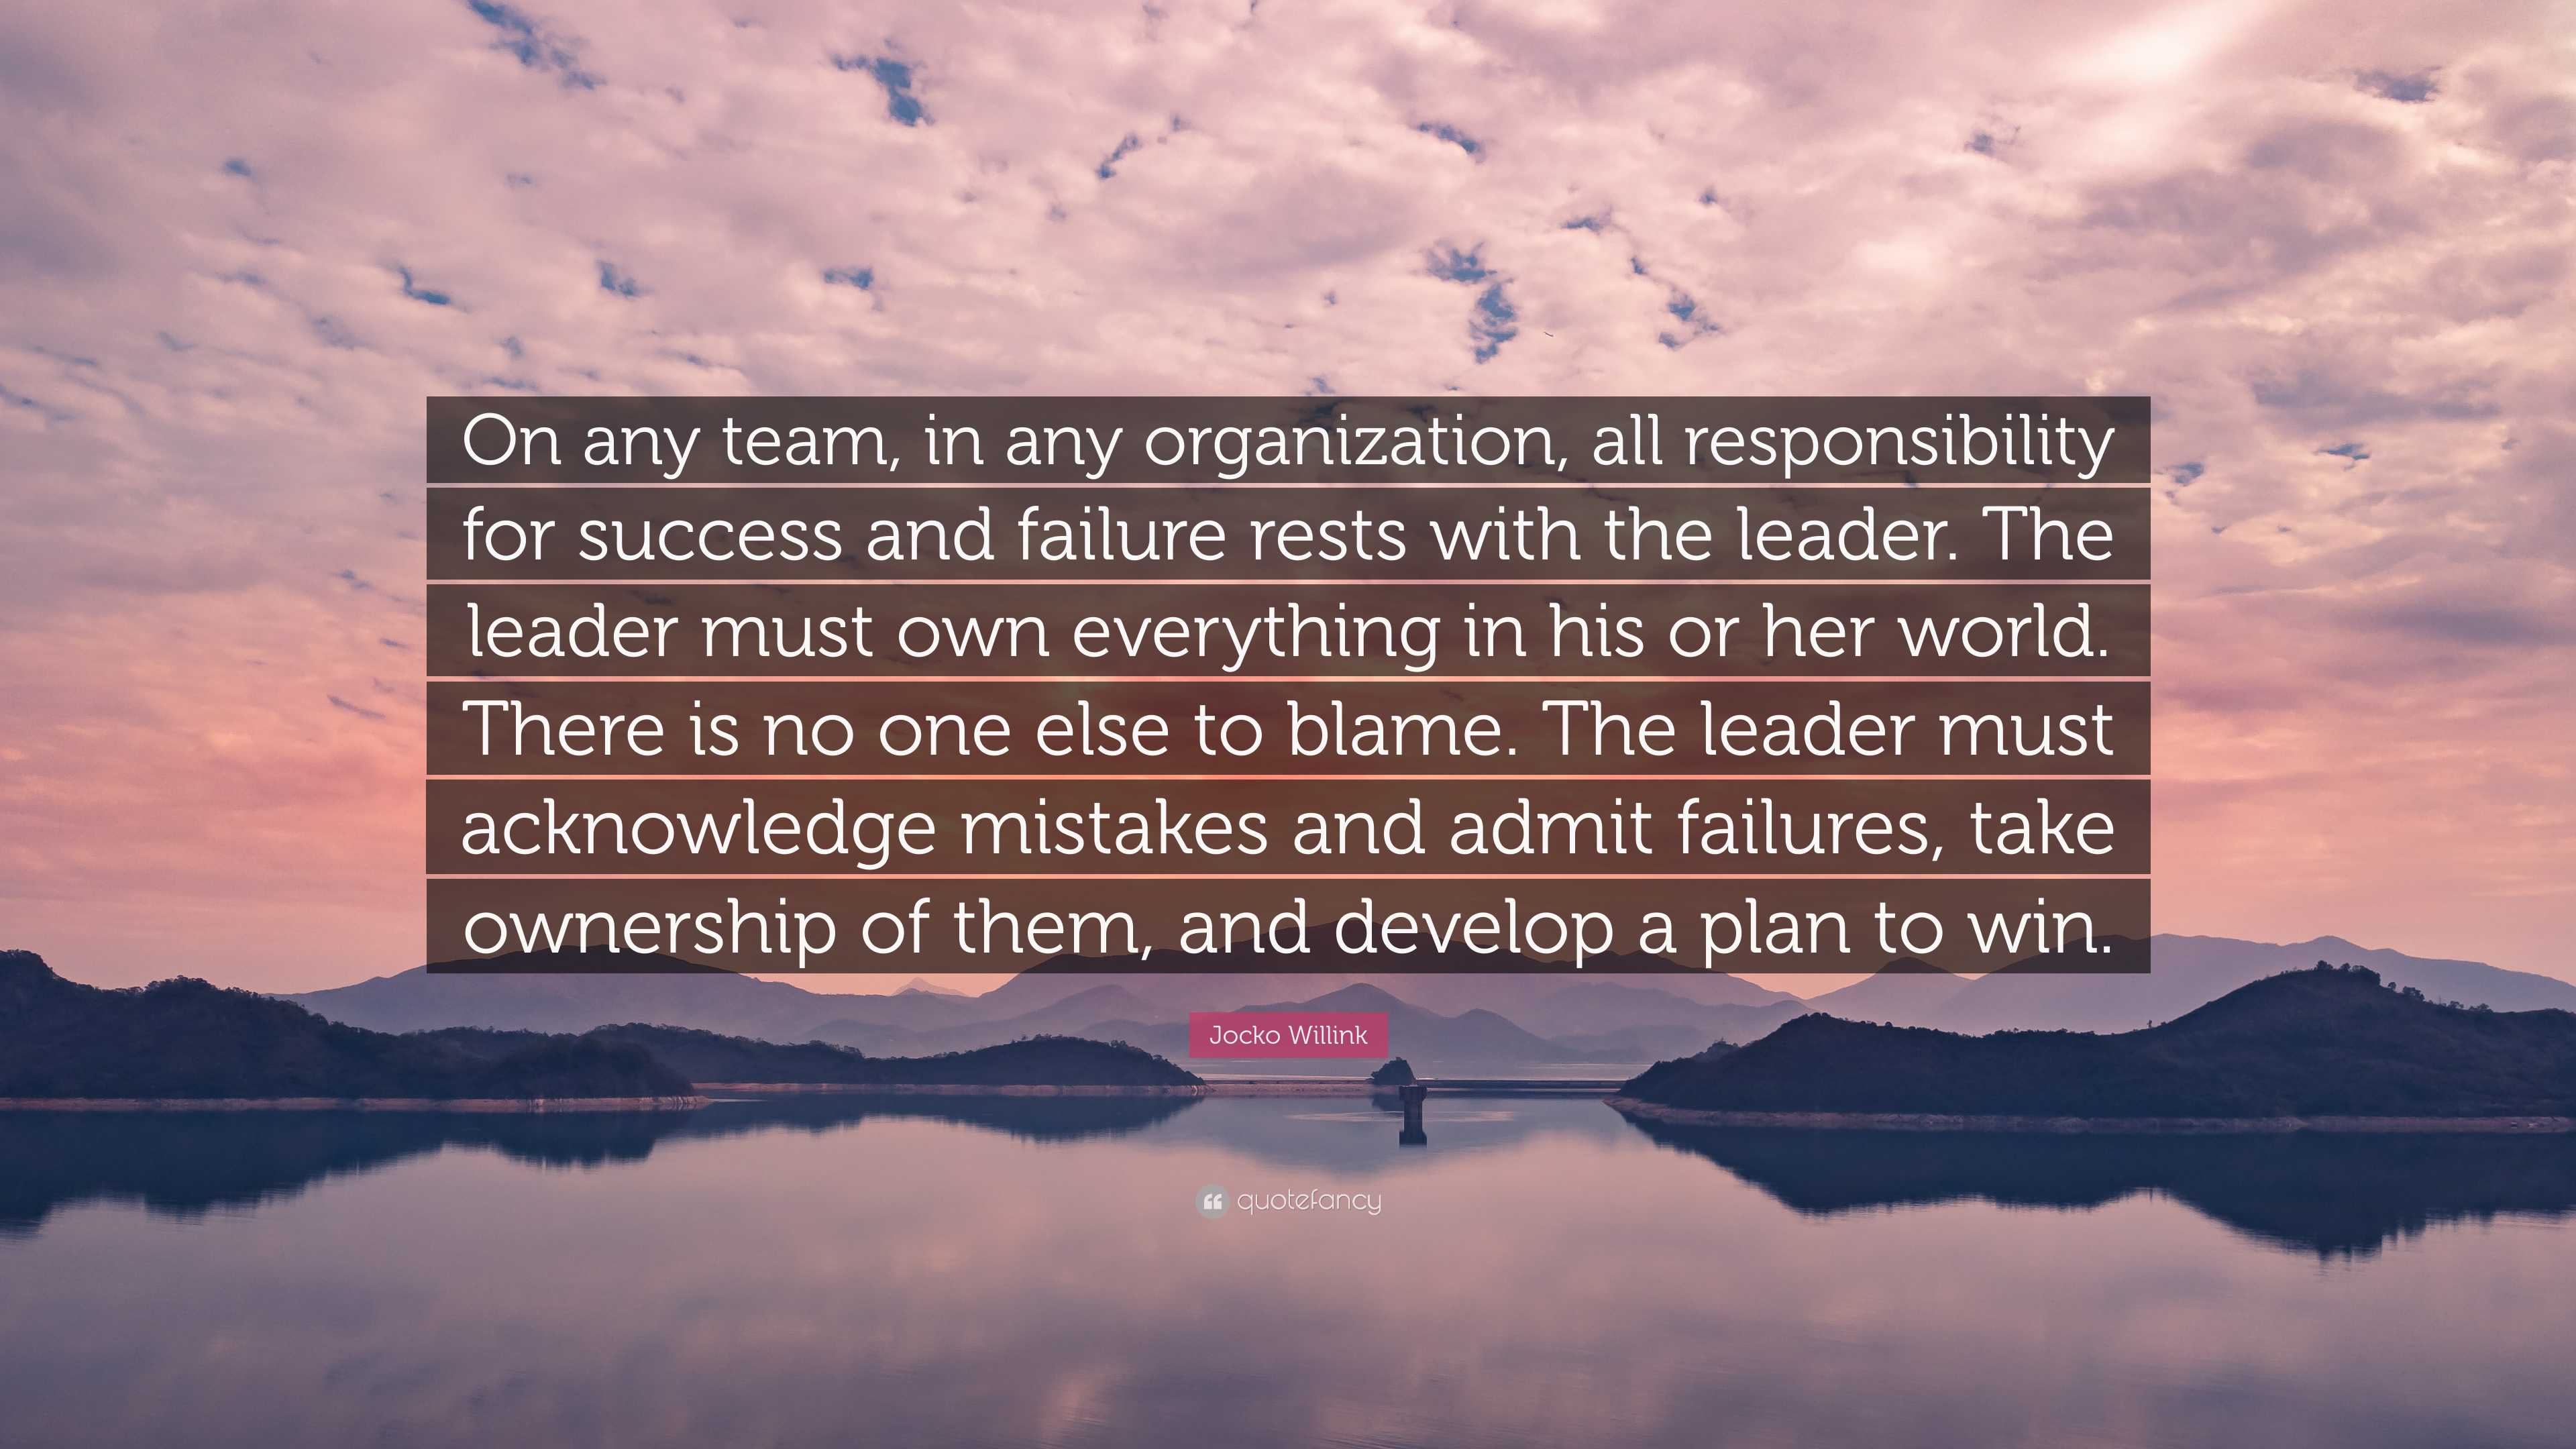 Jocko Willink Quote: “On any team, in any organization, all responsibility  for success and failure rests with the leader. The leader must own ”